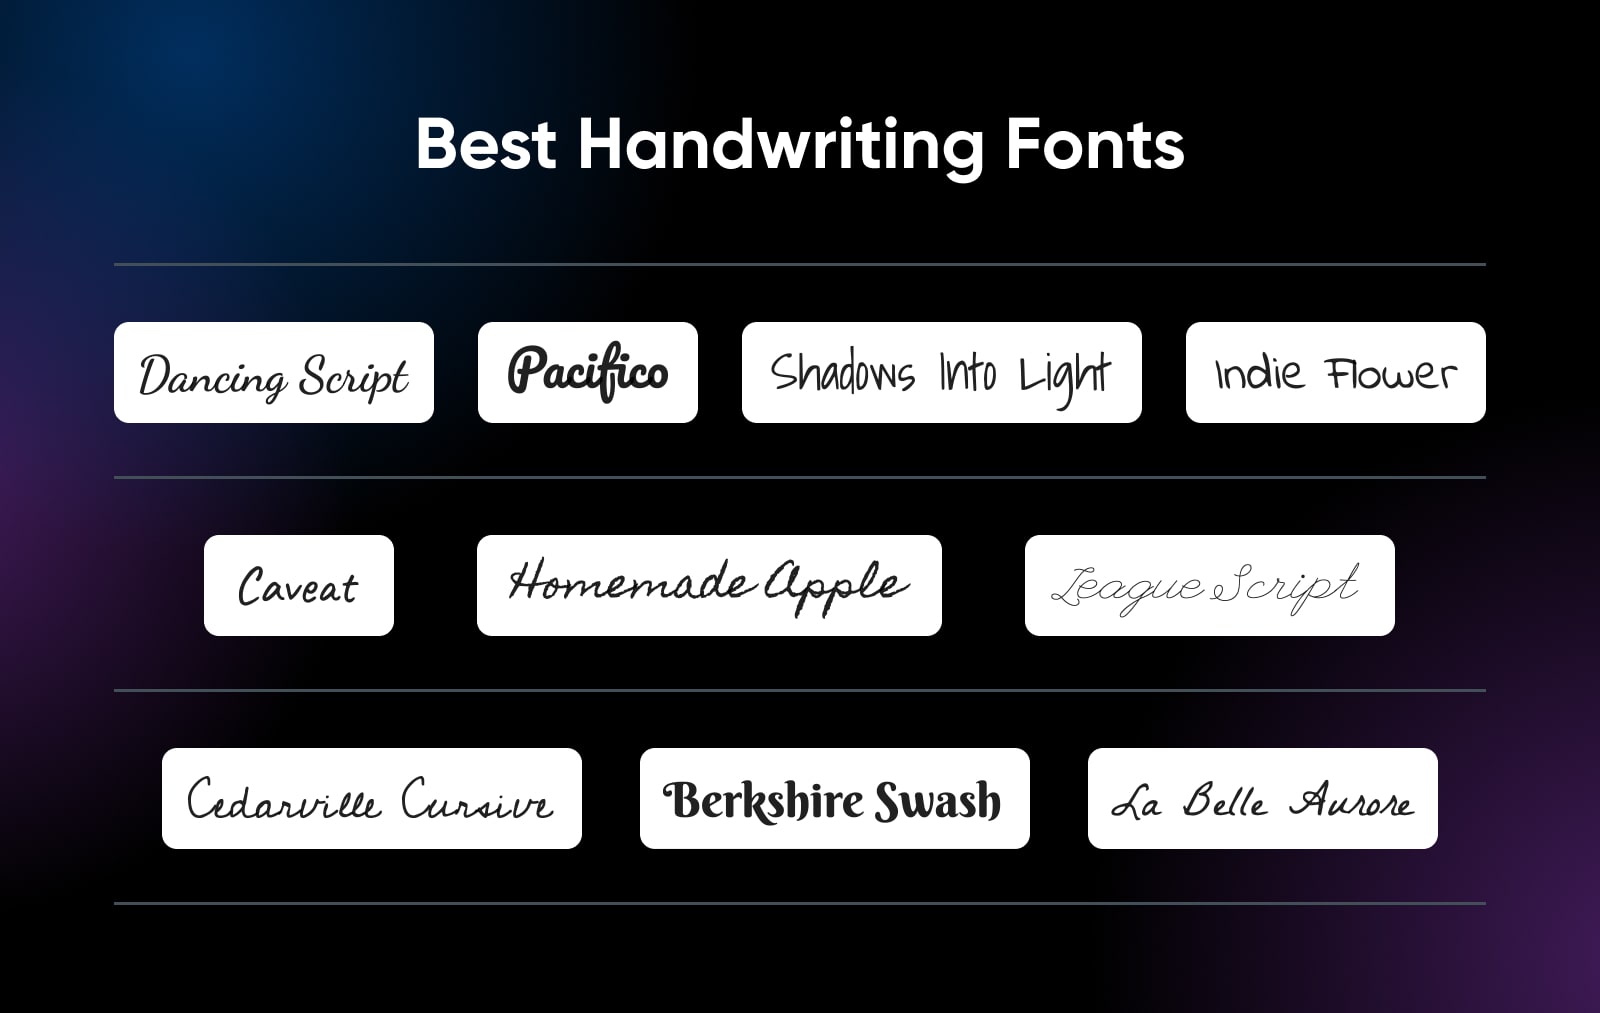 Best handwriting fonts showing an example of each of the ten fonts listed below